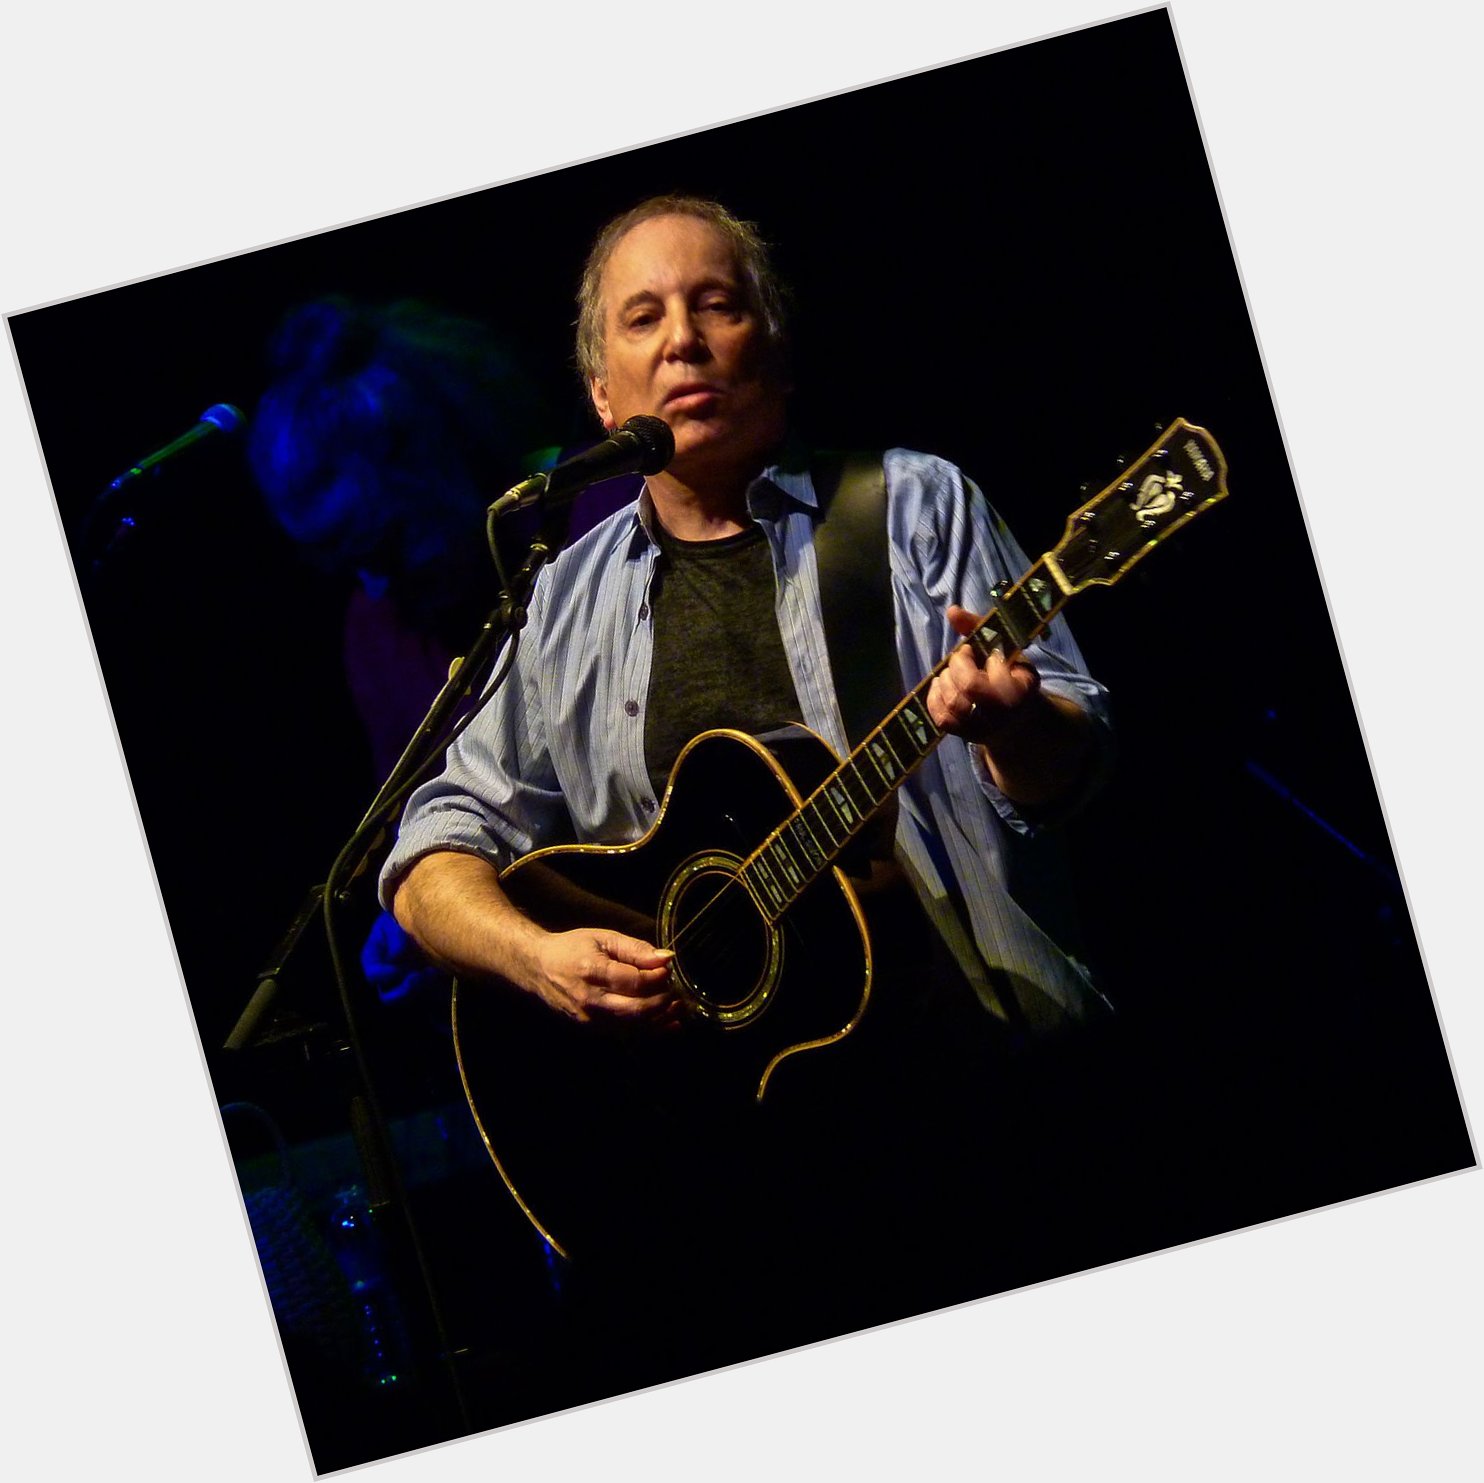 A Big BOSS Happy Birthday today to Paul Simon from all of us at Boss Boss Radio! 